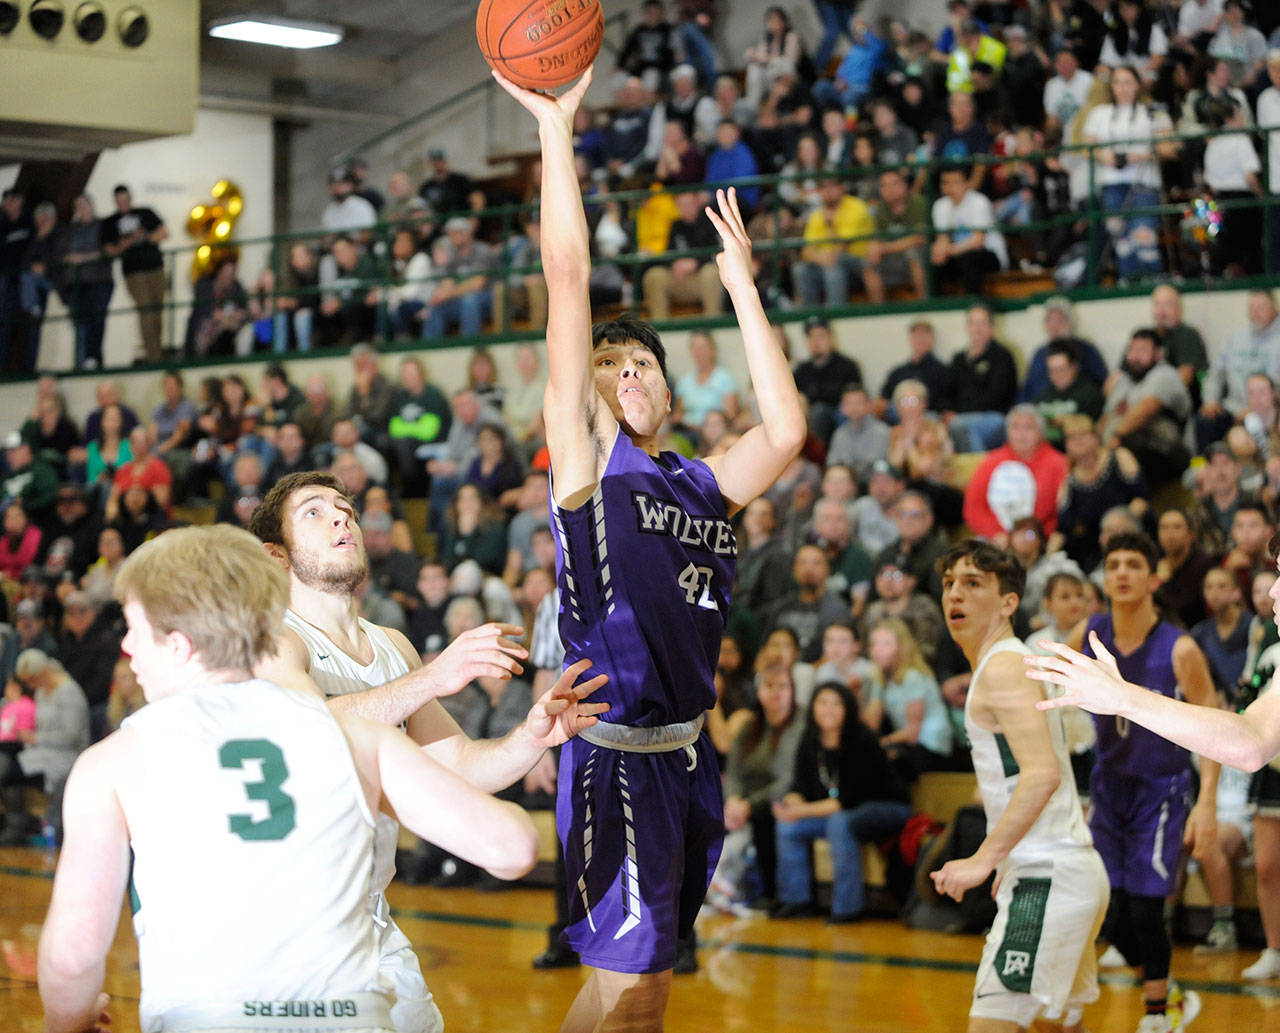 Sequim’s Isaiah Moore, center, puts up a shot over the Port Angeles defense in the Wolves’ 57-32 loss on Feb. 6. Sequim Gazette photo by Michael Dashiell